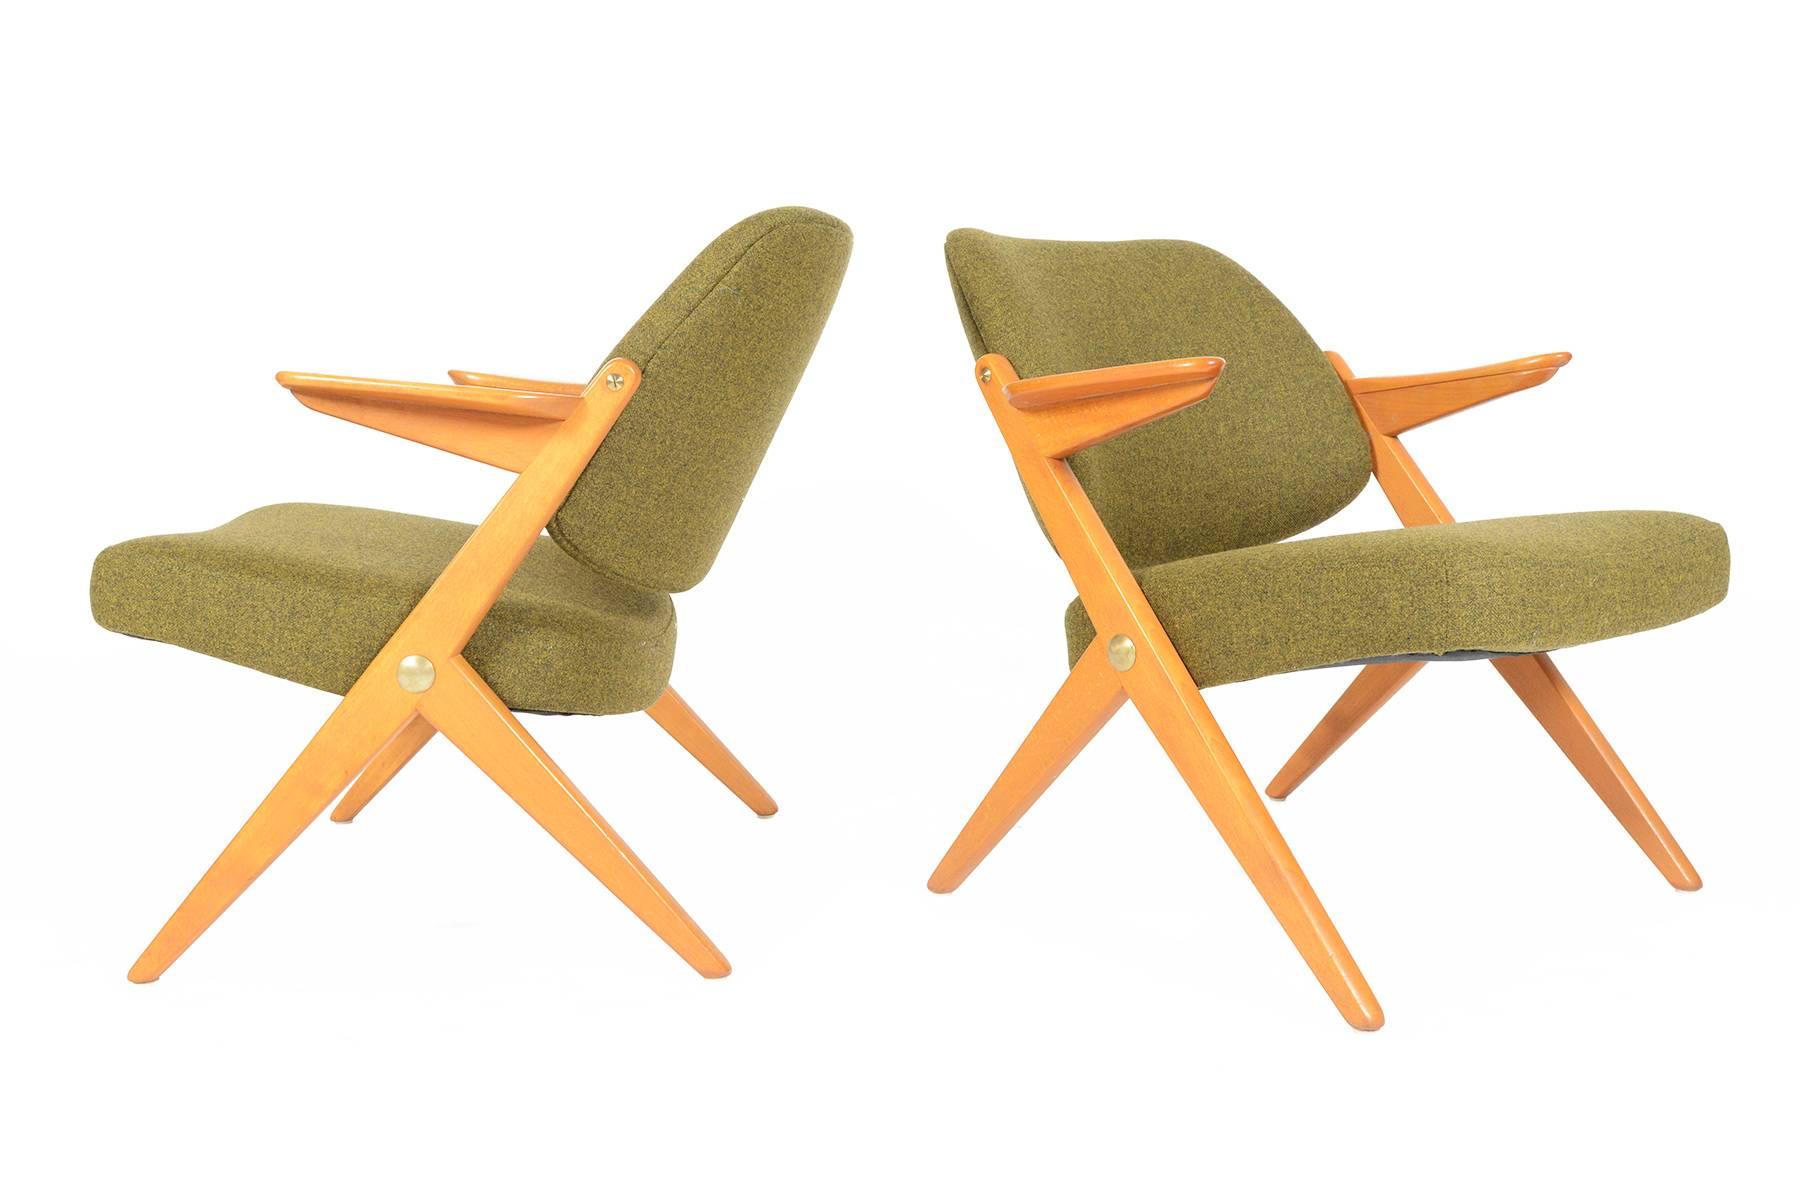 This pair of Danish modern Bengt Ruda designed lounge chairs is a true modern Classic. Crafted in birch and manufactured by Nordiska for the 